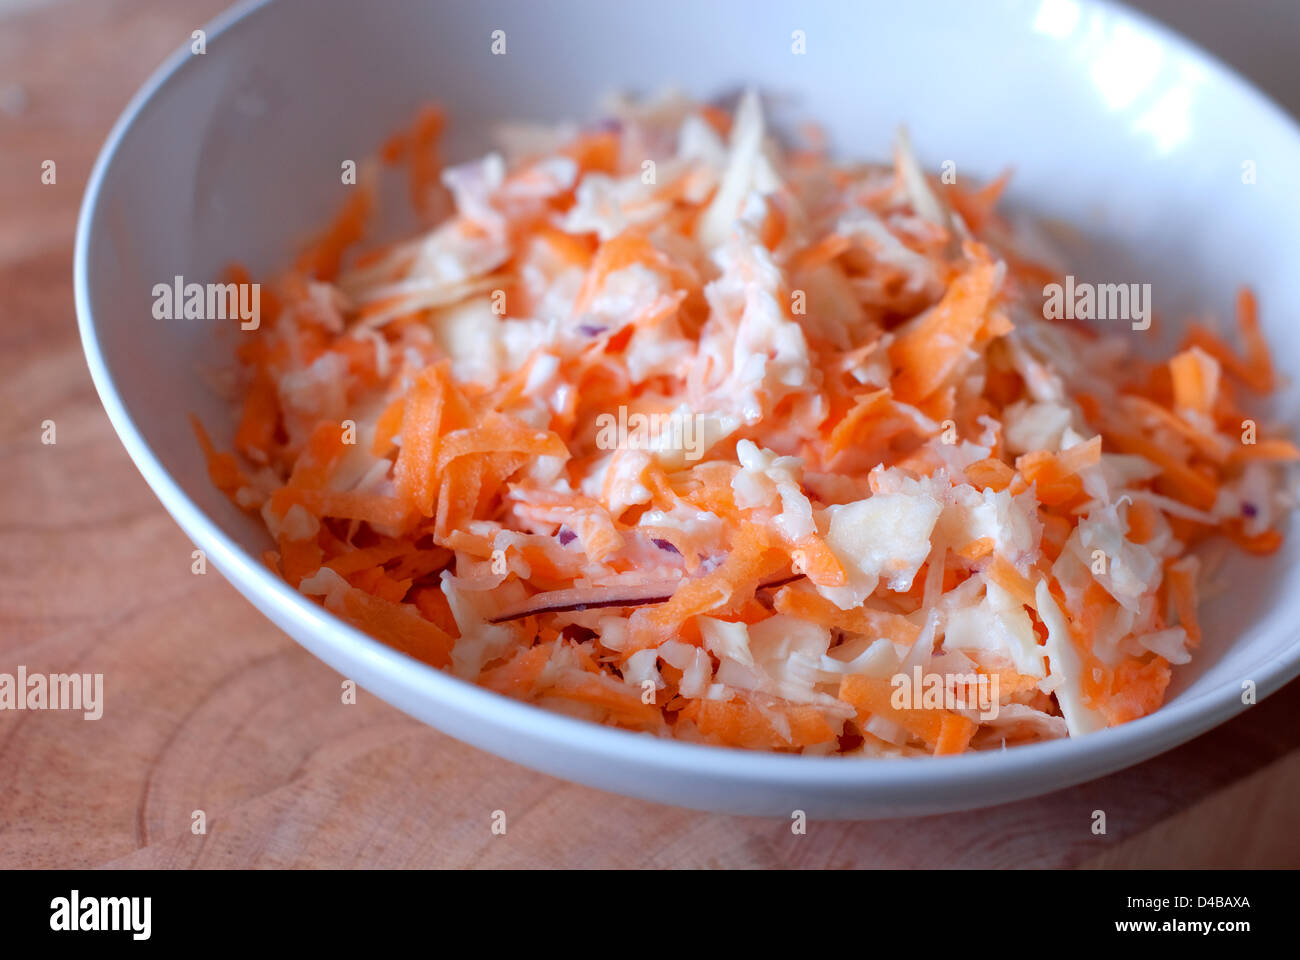 Still life Food image of a white bowl filled with home made coleslaw Stock Photo